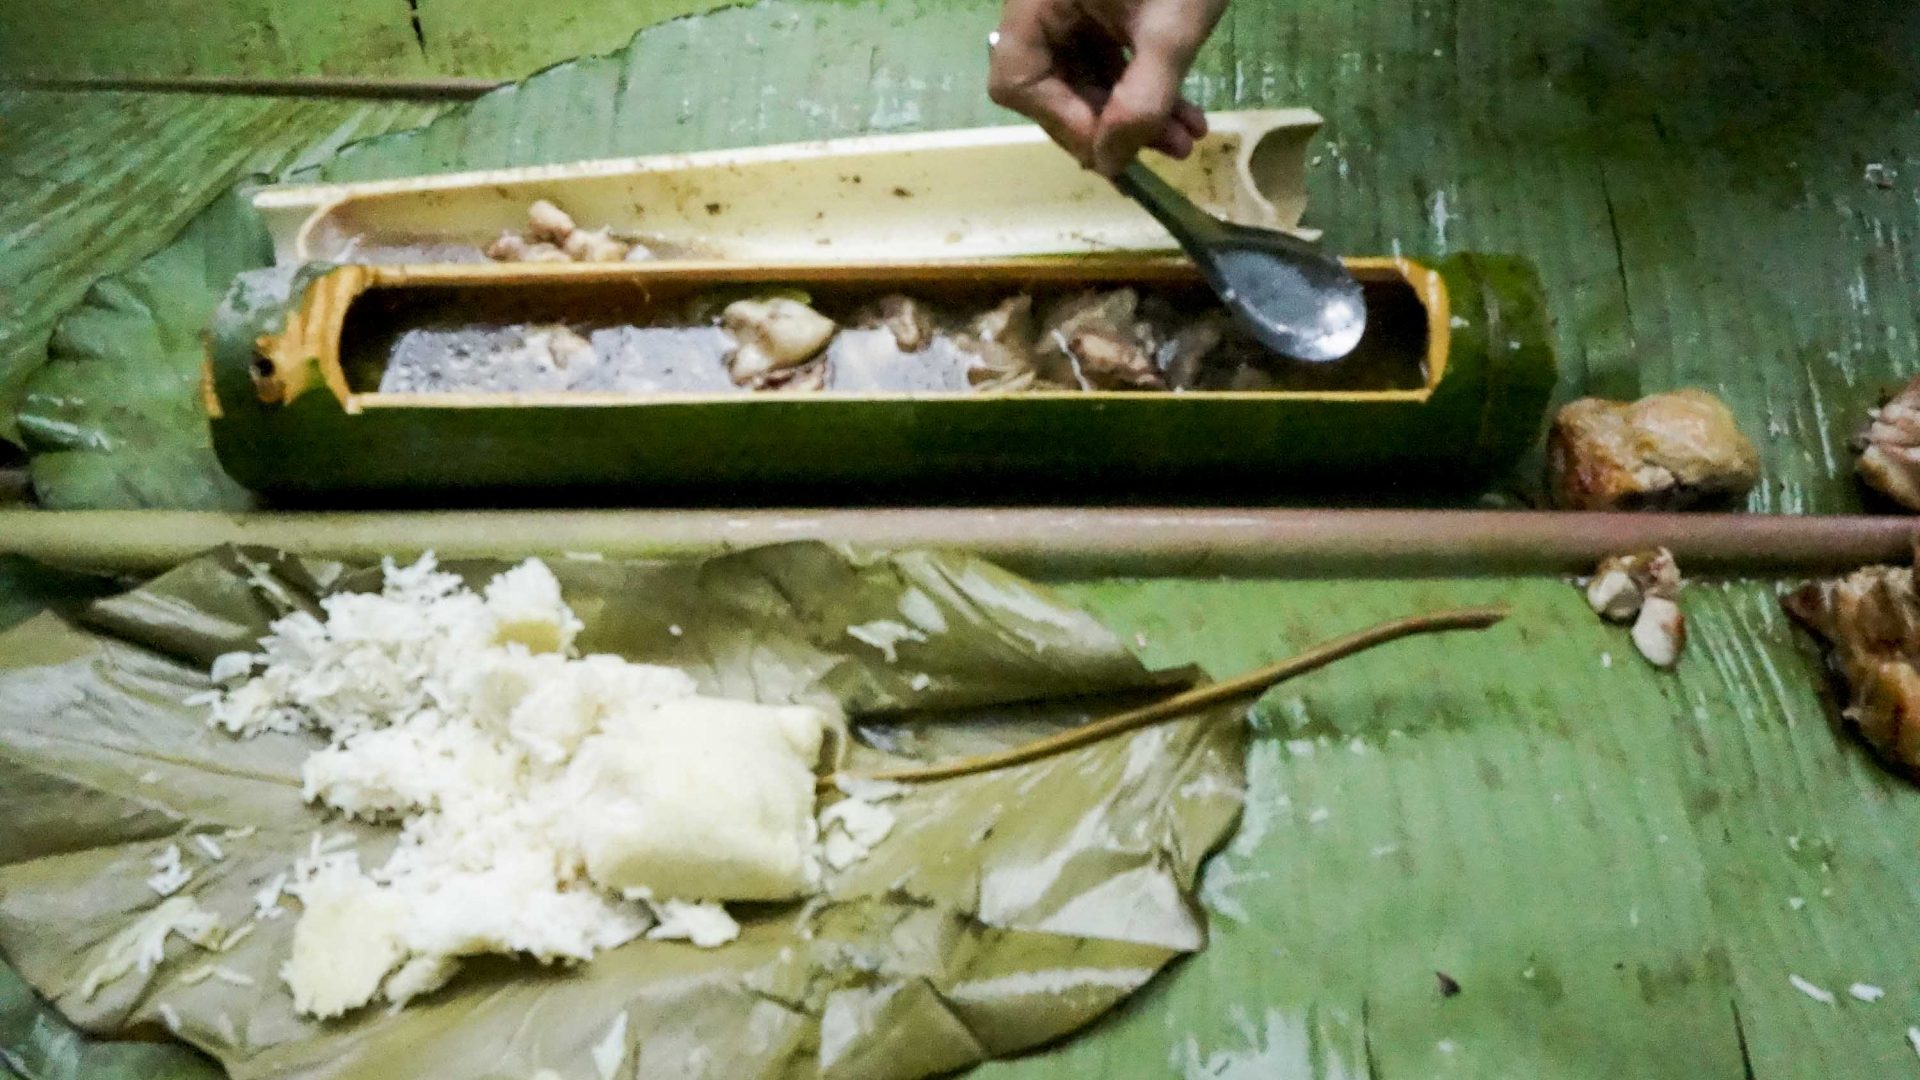 A meal of rice, meat and soup on some banana leaves. The soup is in a bowl made of bamboo.